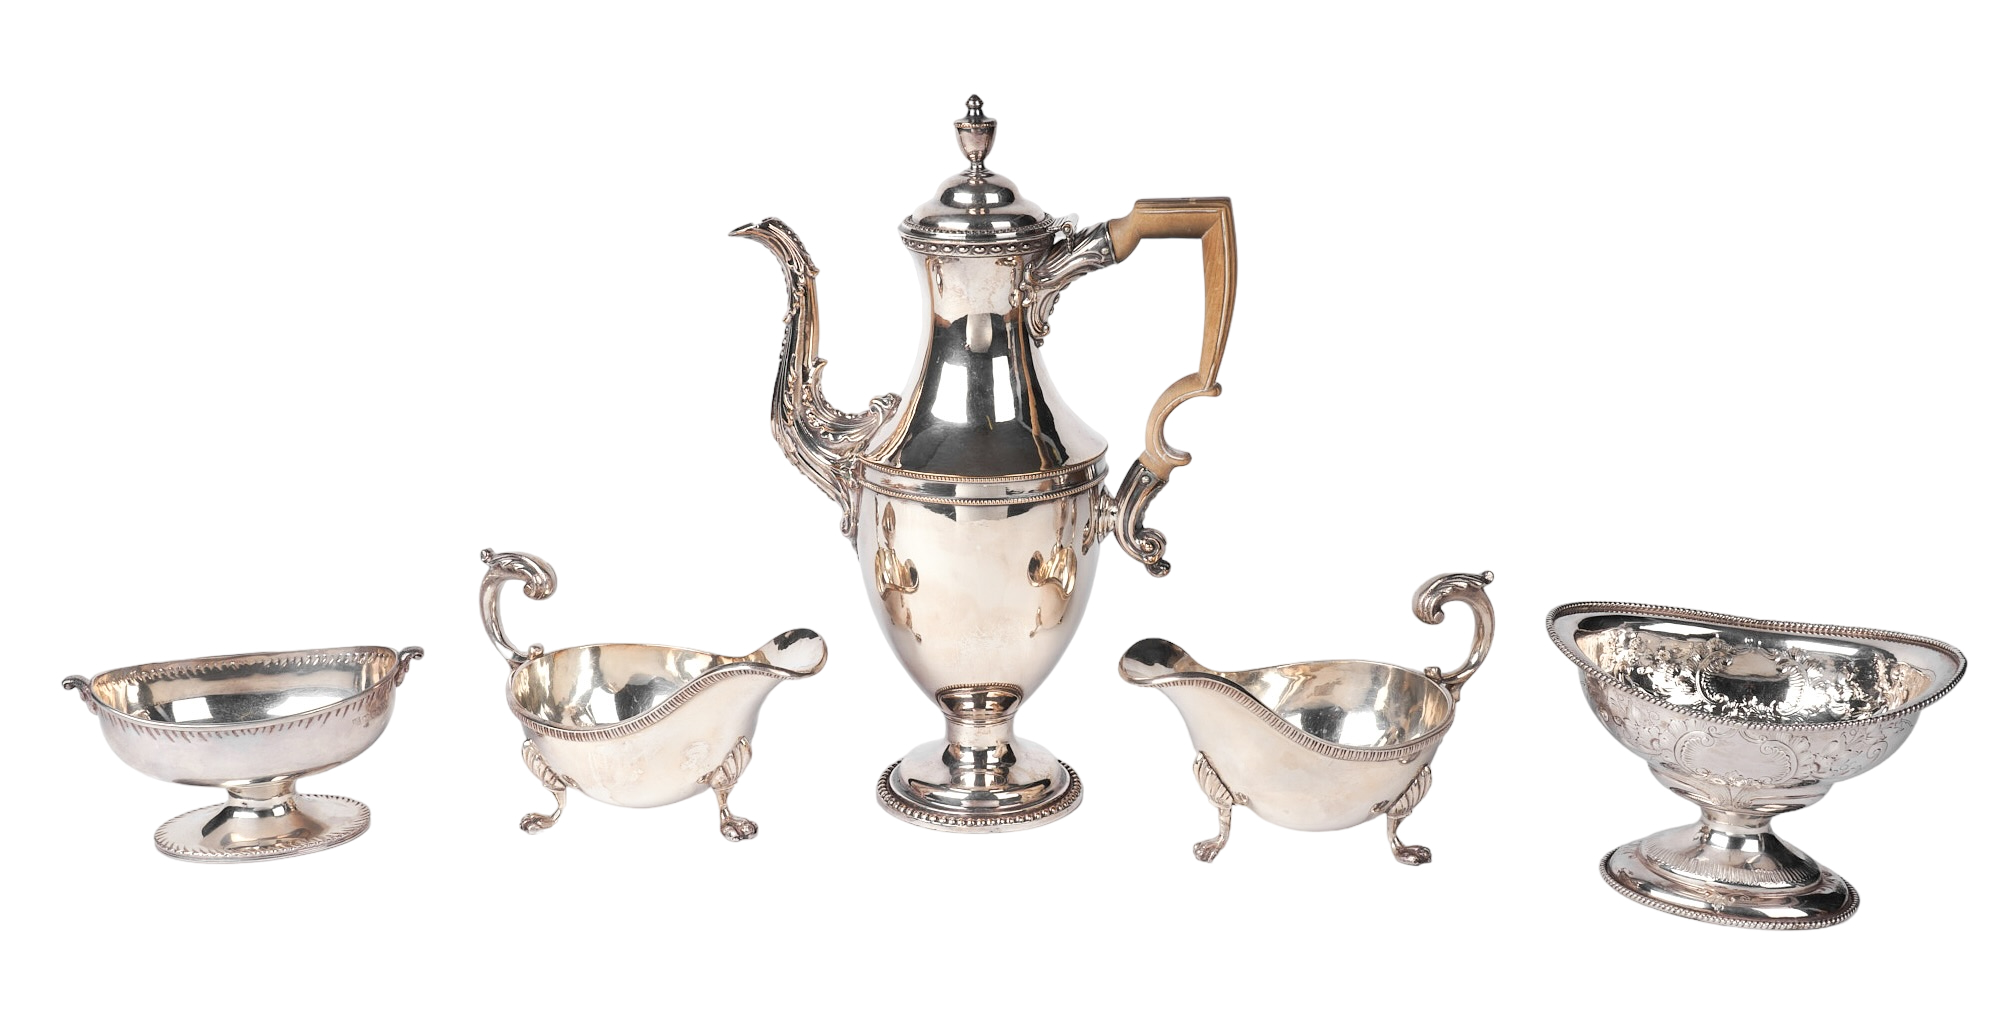 Georgian sterling footed compote 2e2020